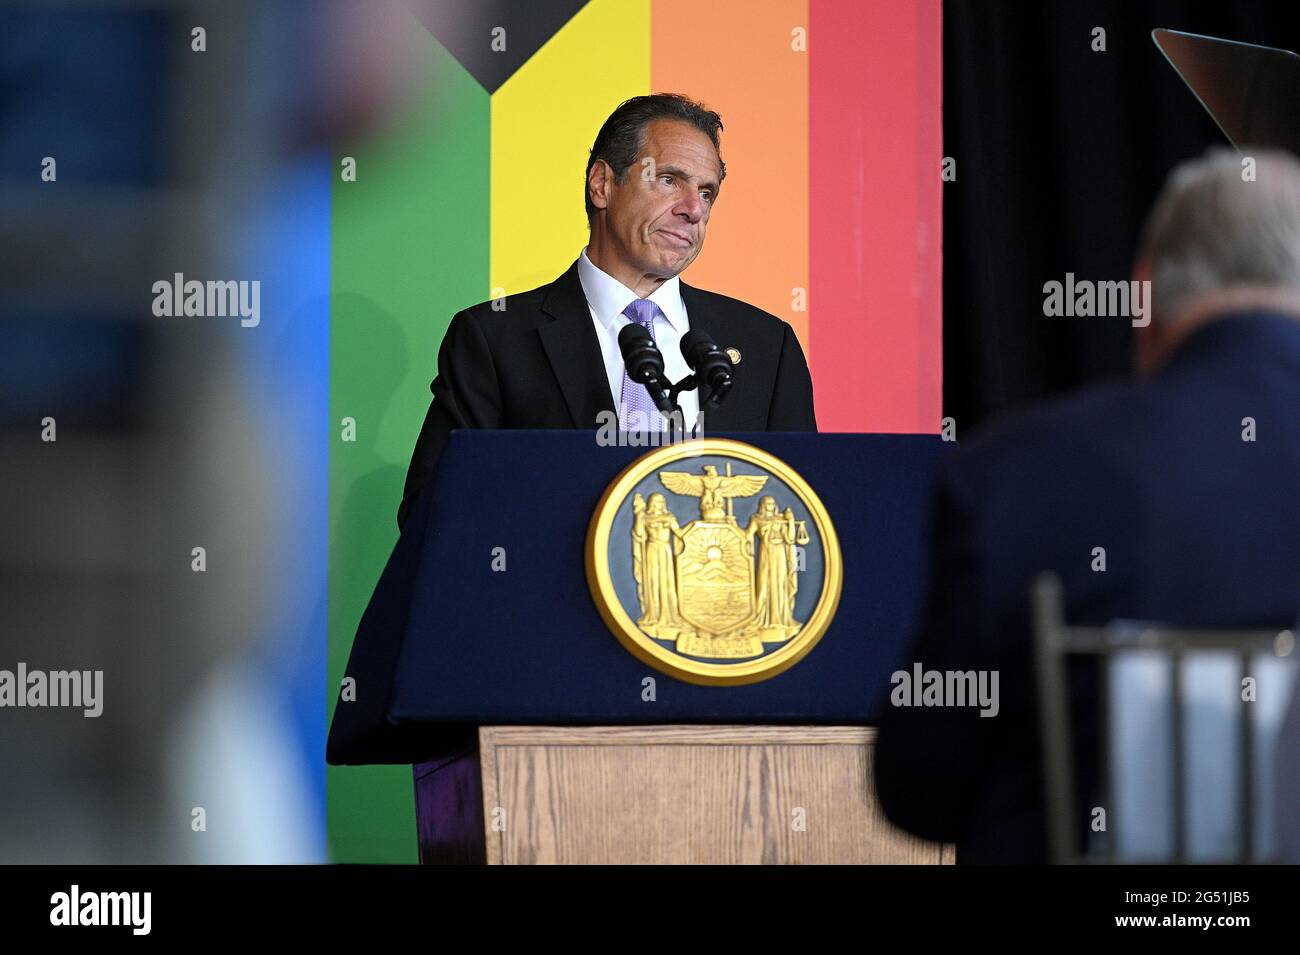 New York, USA. 24th June, 2021. New York Gov. Andrew Cuomo speaks at a ceremony before signing the Gender Recognition Act on the 10th anniversary of the Marriage Equality Act, in honor of Pride Week, at Pier 59 in New York, NY, June 24, 2021. The Gender Recognition Act extends protections for transgender and non-binary New Yorker, allowing people to change their gender on their birth certificates to conform to how they identify themselves. (Photo by Anthony Behar/Sipa USA) Credit: Sipa USA/Alamy Live News Stock Photo